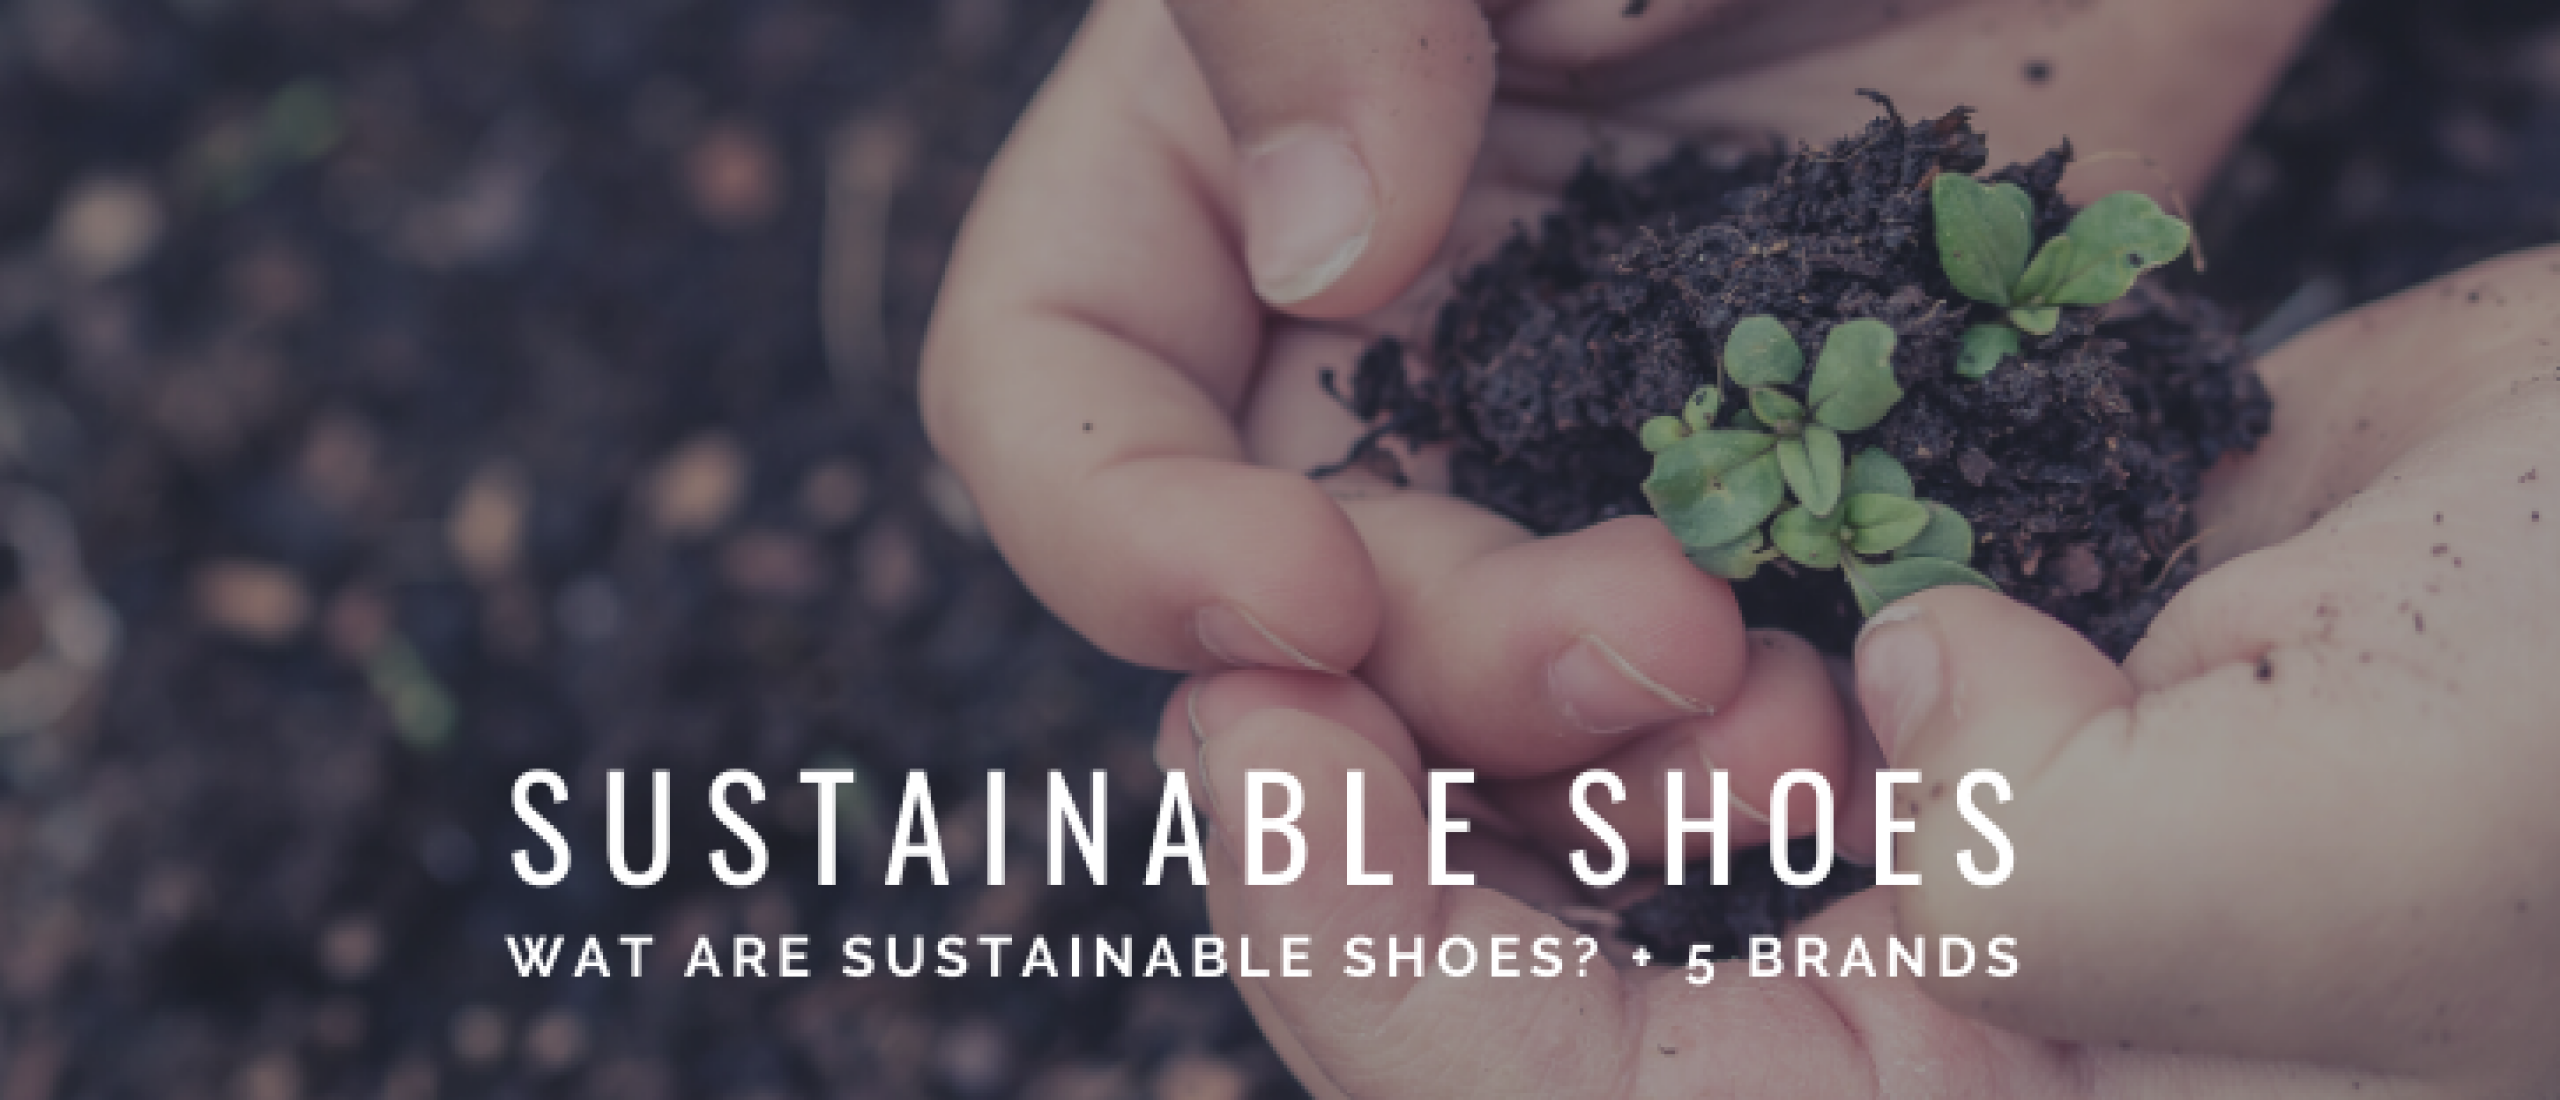 What are Sustainable Shoes? 5 Brands + Explanation